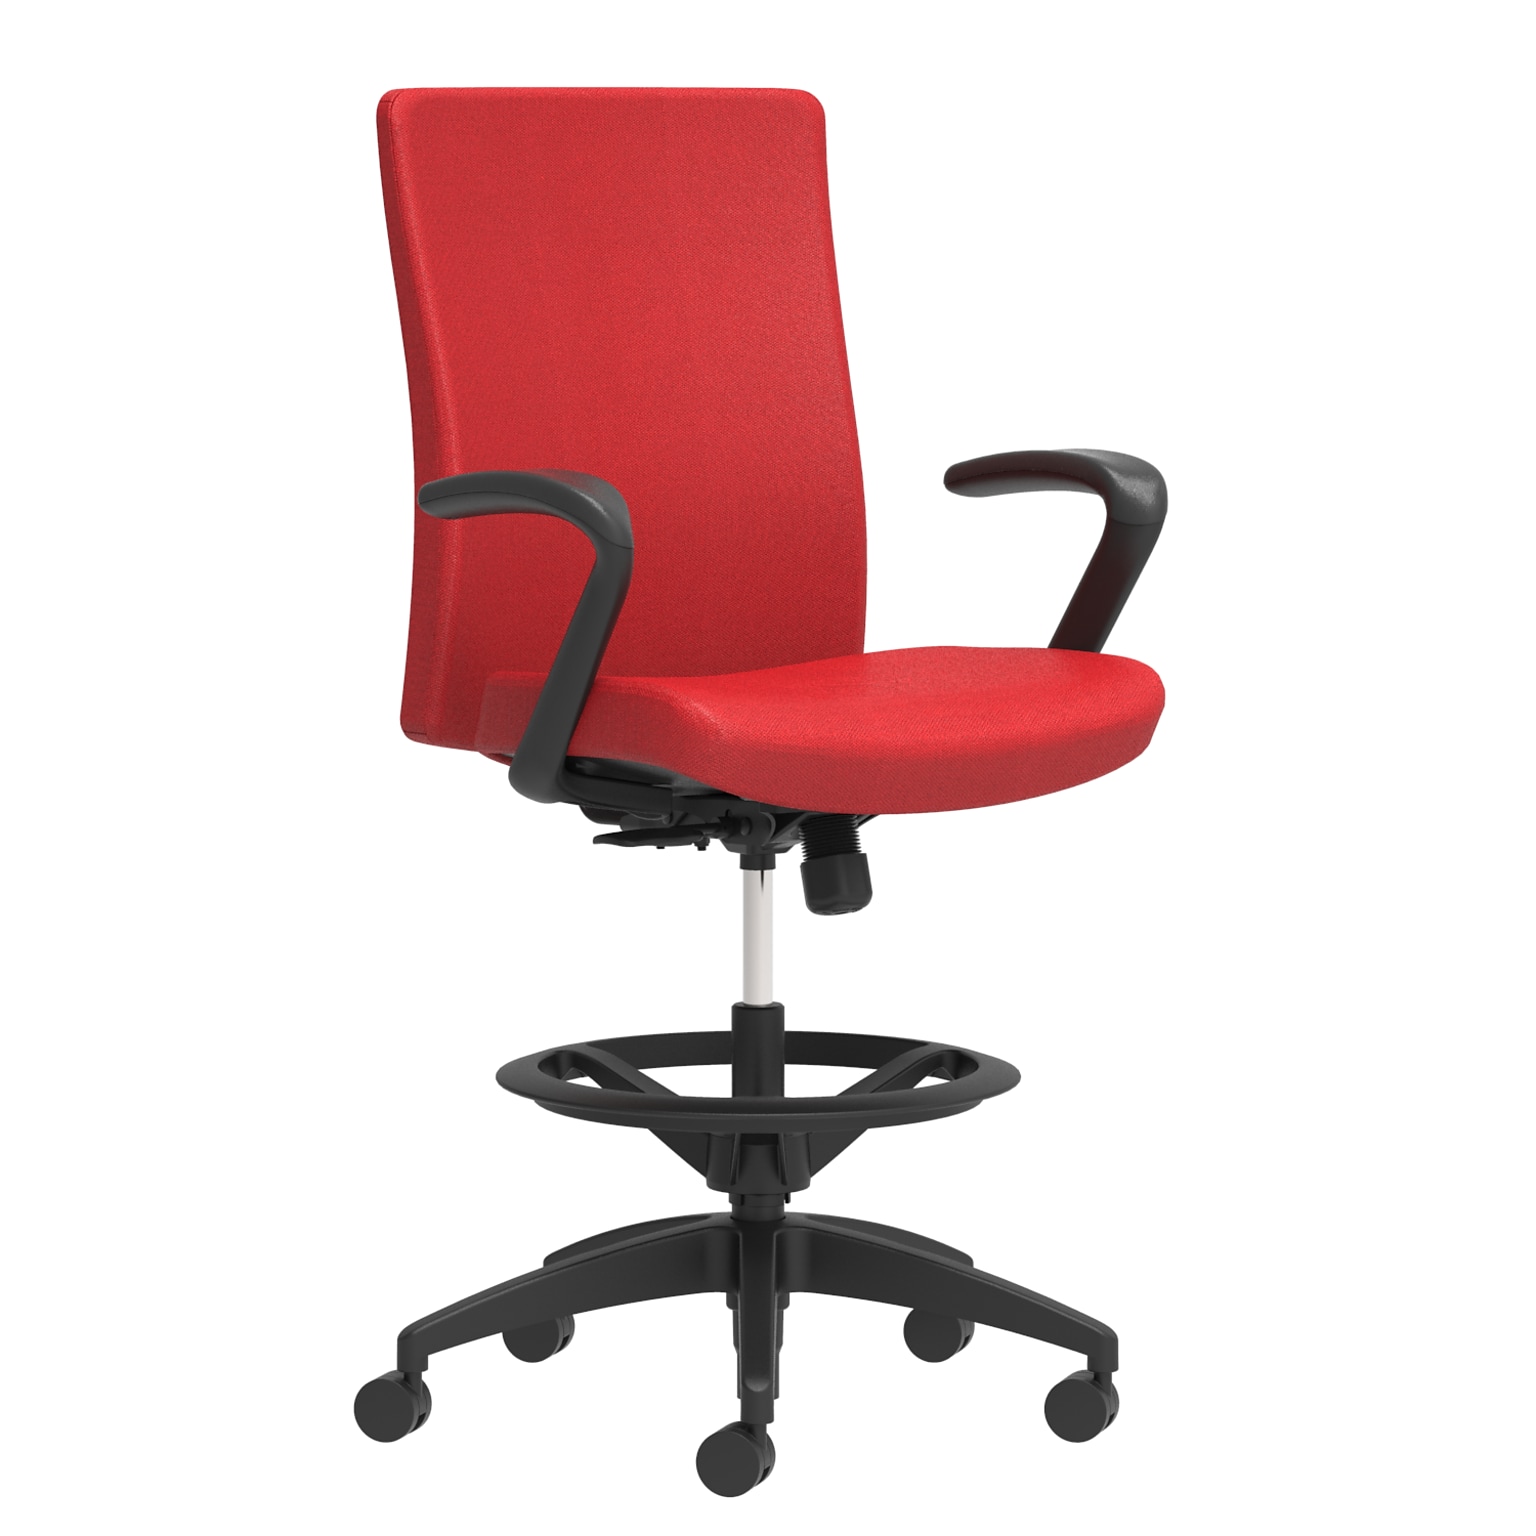 Union & Scale Workplace2.0™ Stool Upholstered, Fixed Arms, Cherry Fabric, Limited Synchro Tilt (54216)